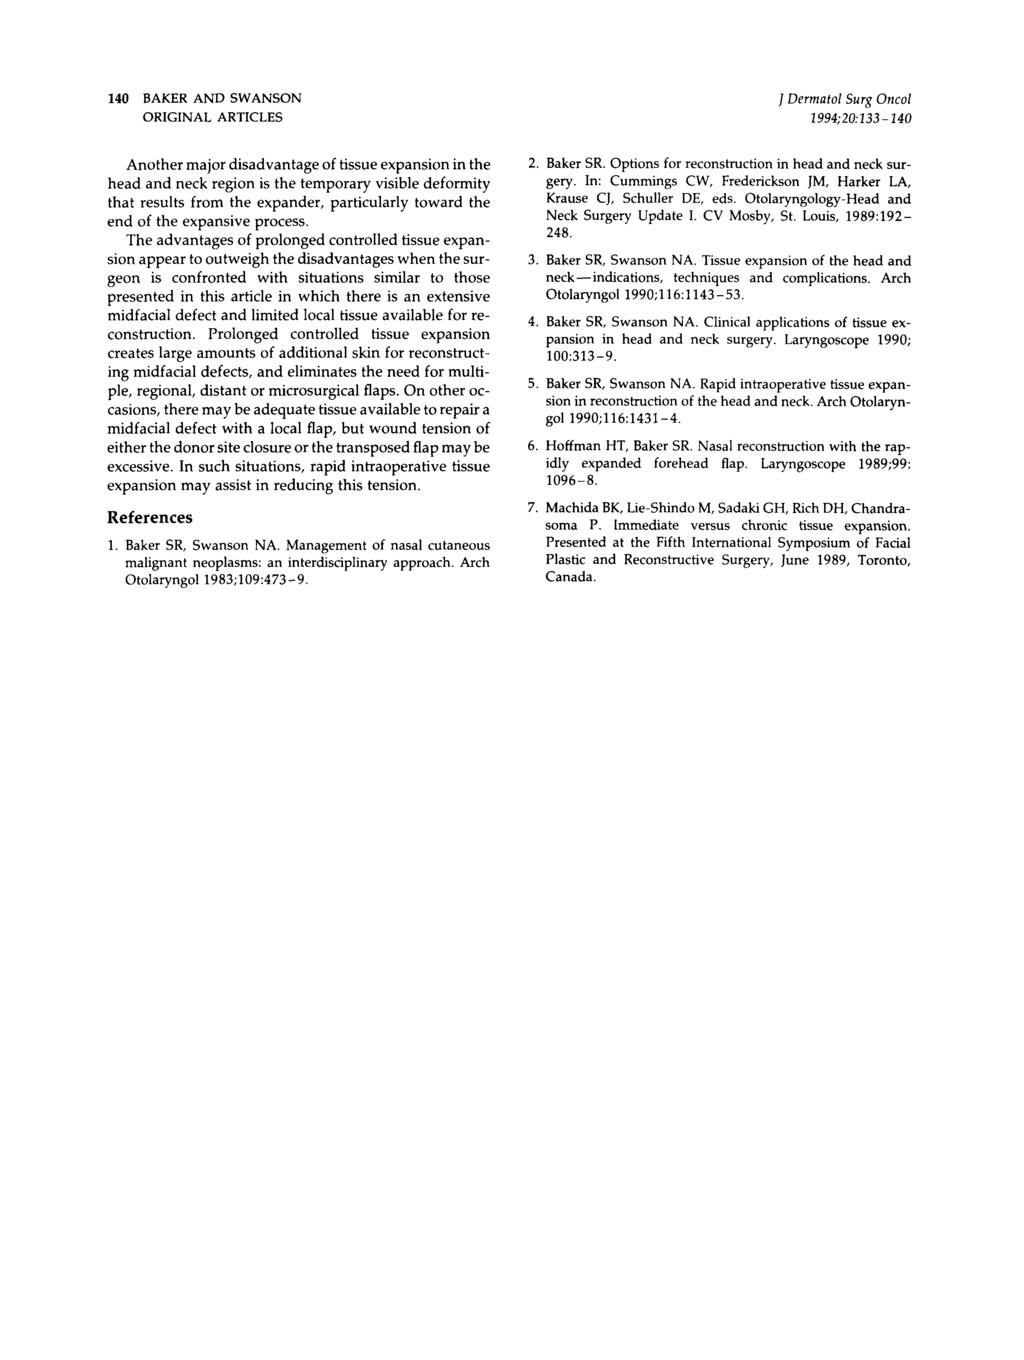 140 BAKER AND SWANSON ORIGINAL ARTICLES Dermatol Surg Oncol 1994:20:133-140 Another major disadvantage of tissue expansion in the head and neck region is the temporary visible deformity that results